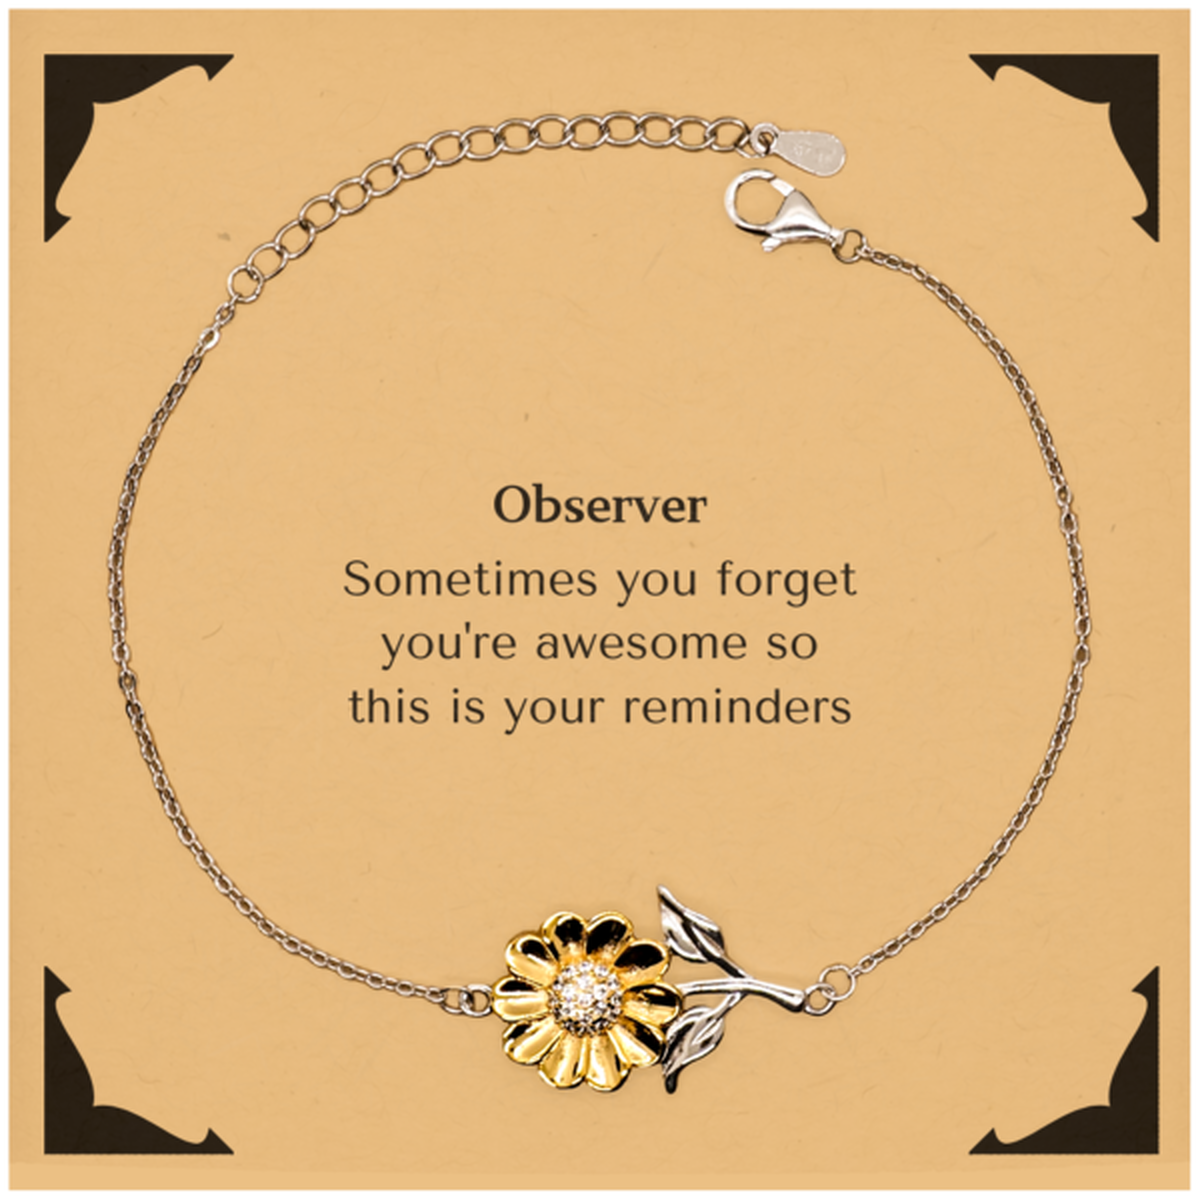 Sentimental Observer Sunflower Bracelet, Observer Sometimes you forget you're awesome so this is your reminders, Graduation Christmas Birthday Gifts for Observer, Men, Women, Coworkers